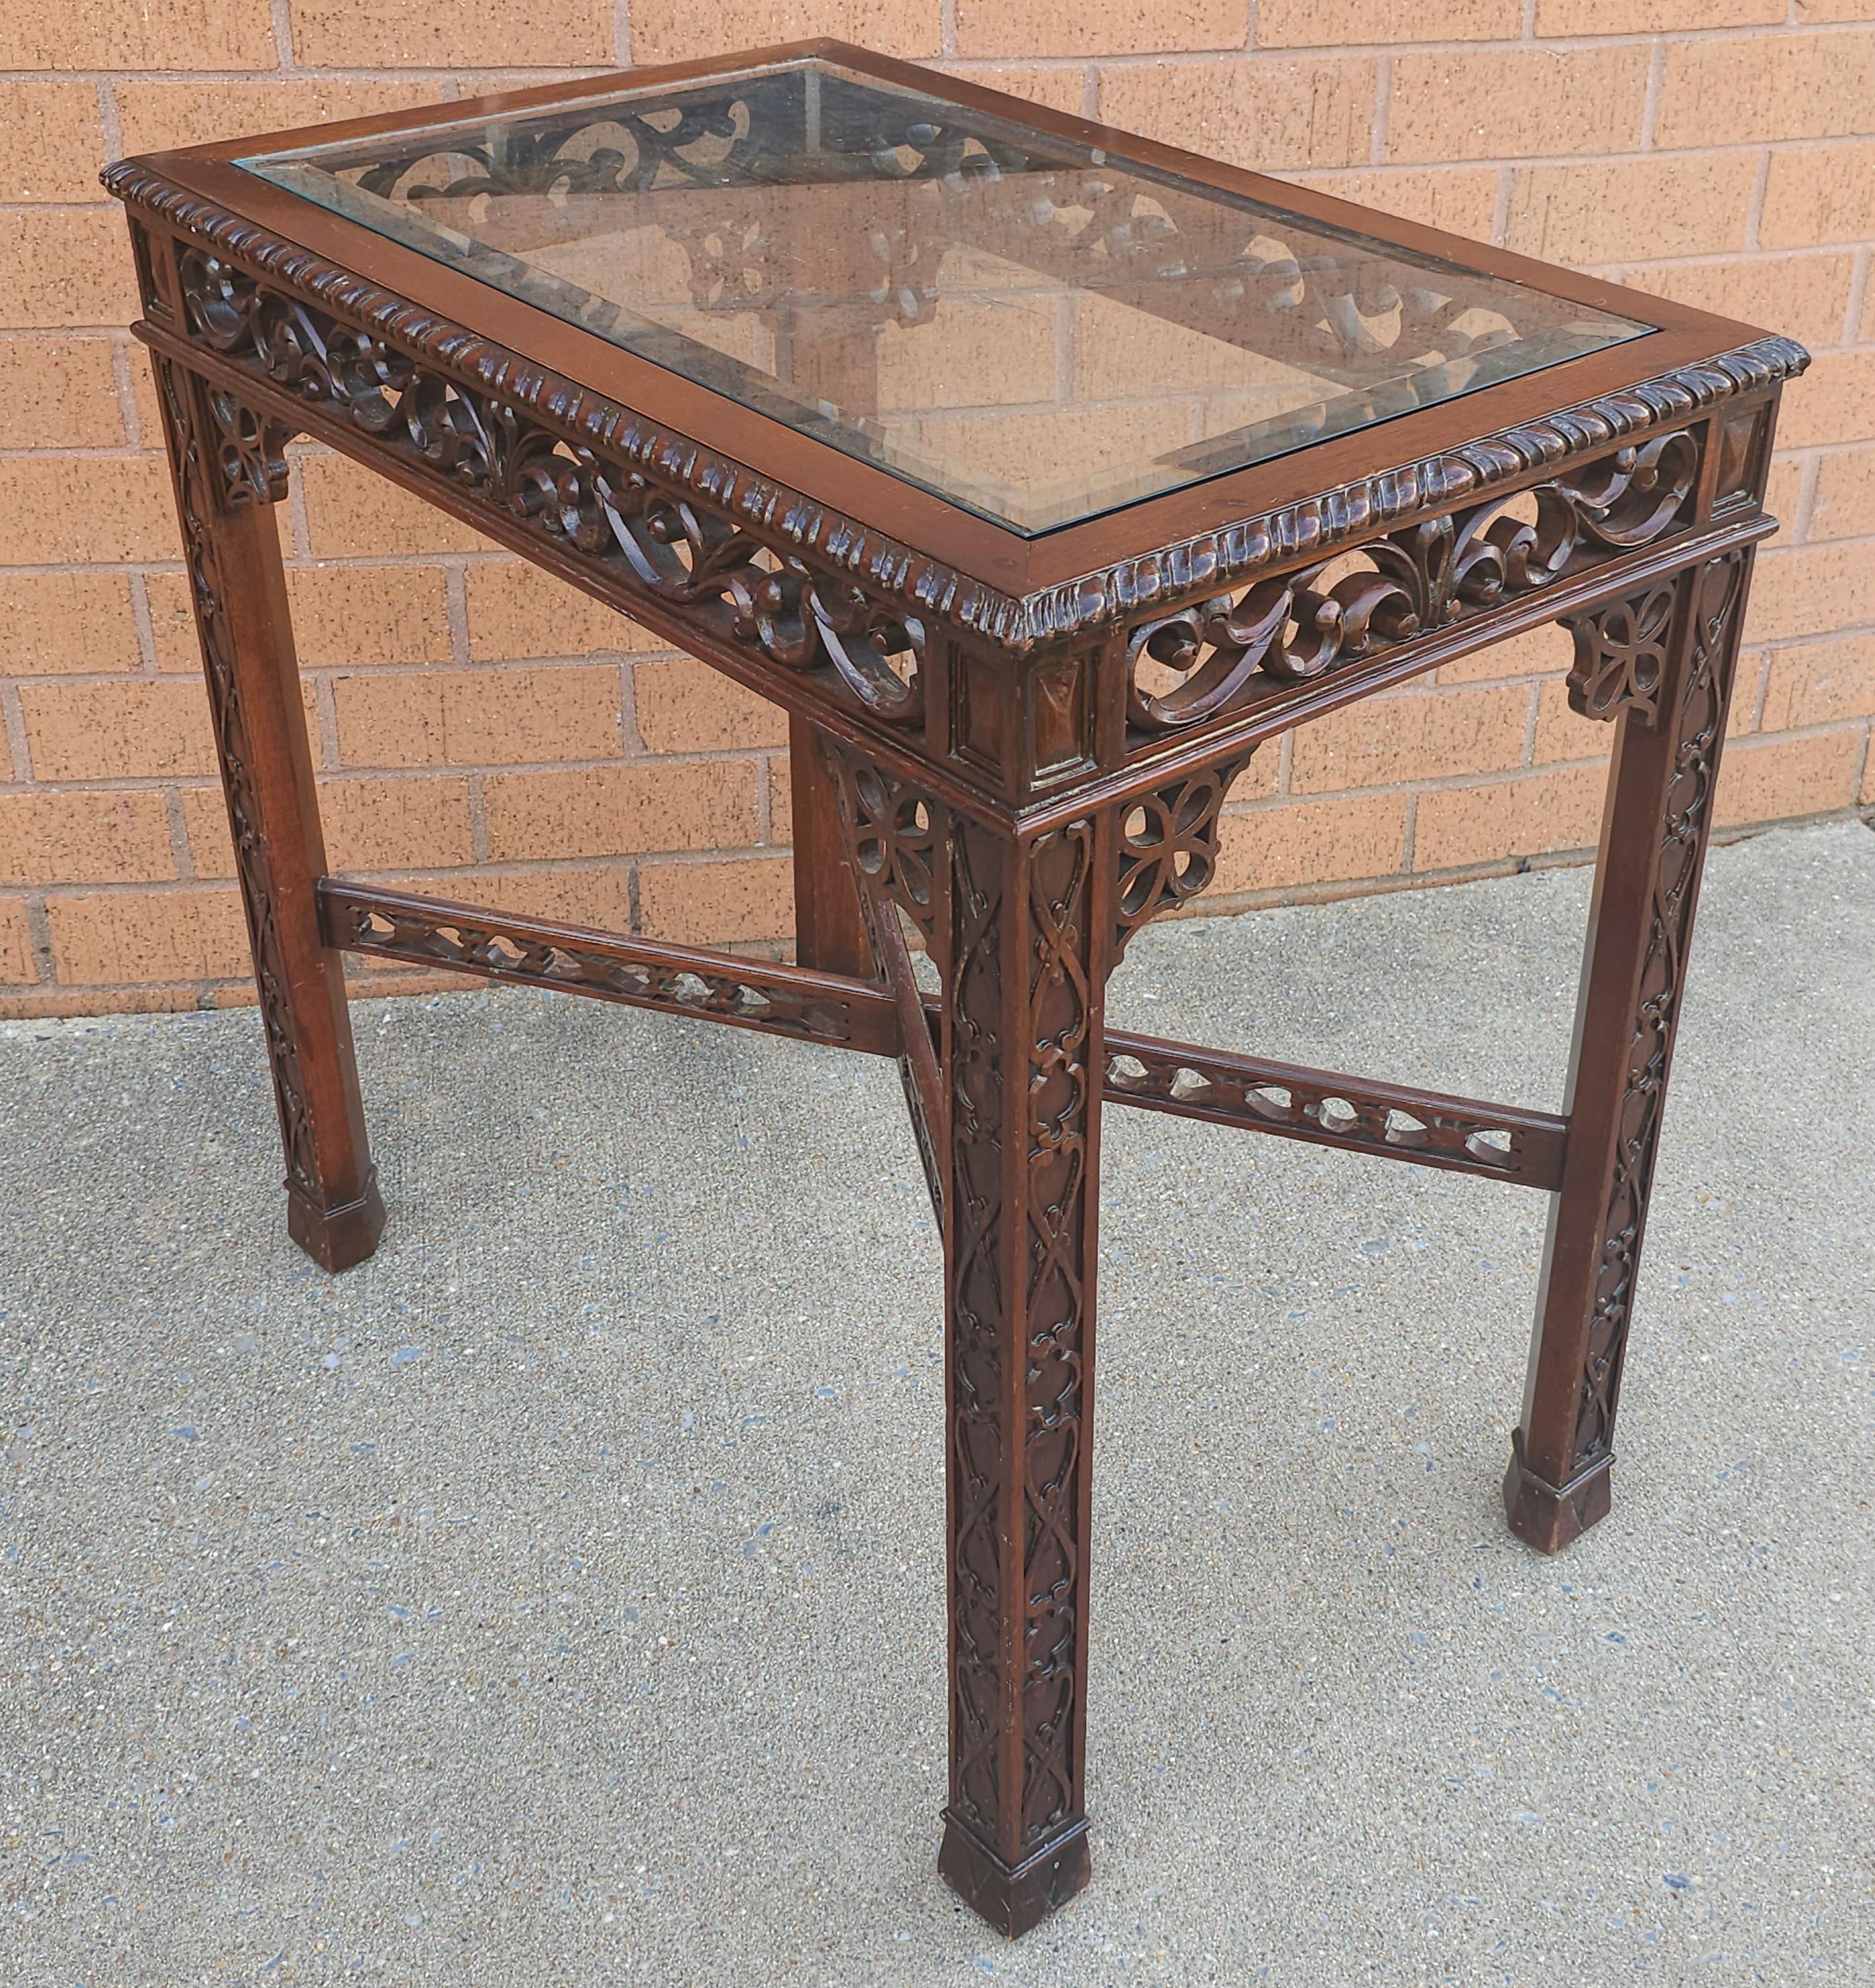 Pair Of Chinese Chippendale Style Fretwork and Glass Inset Mahogany Side Tables For Sale 1